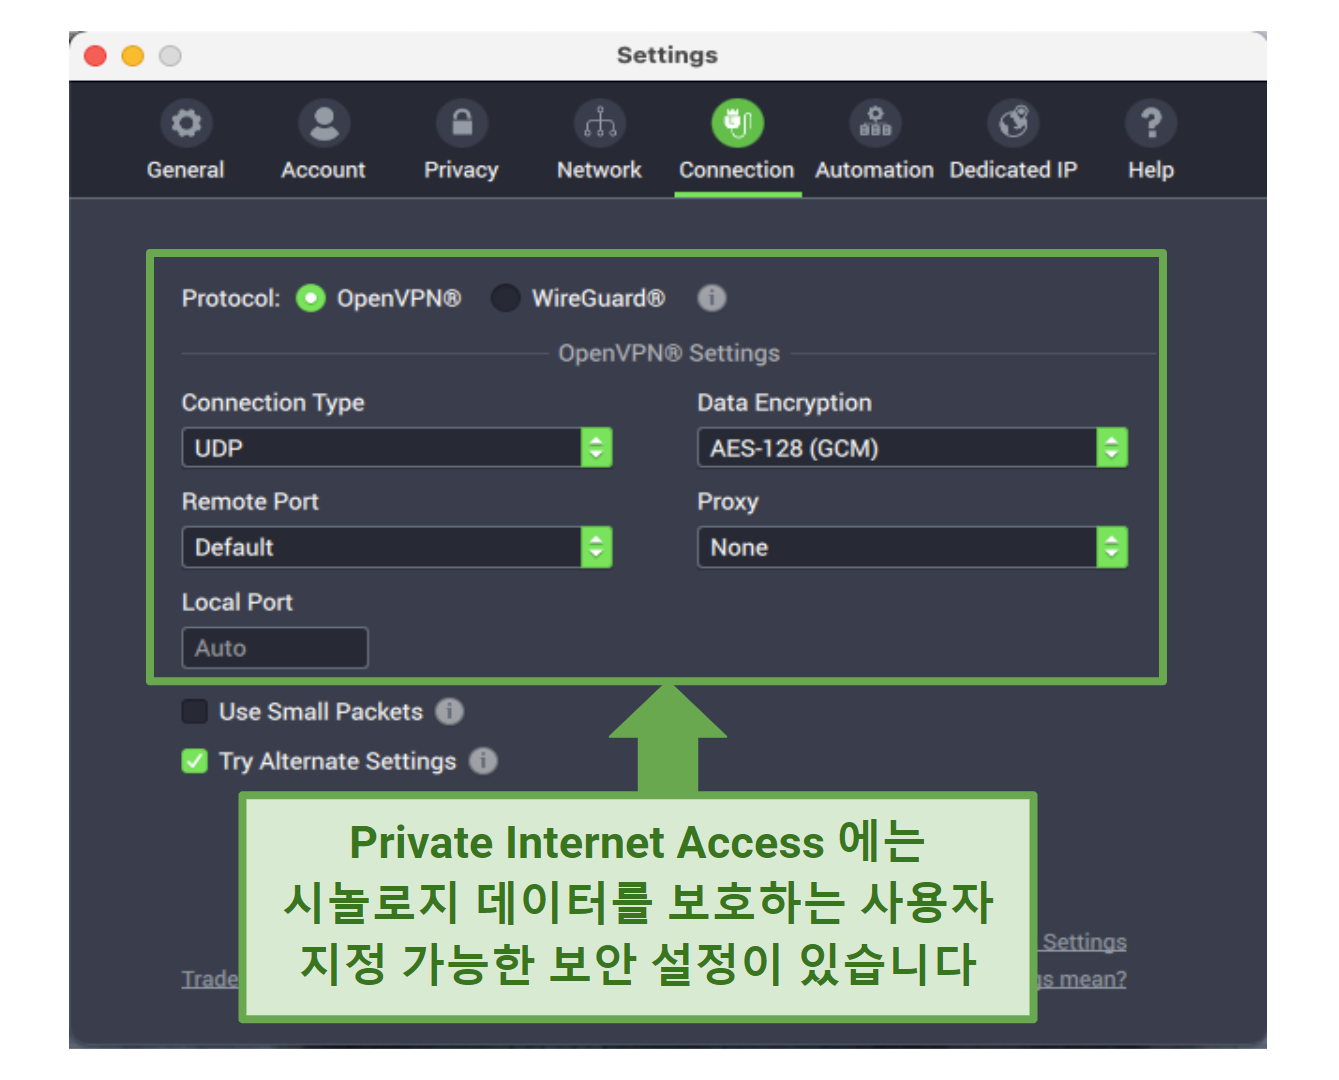 An illustration of PIA's security settings